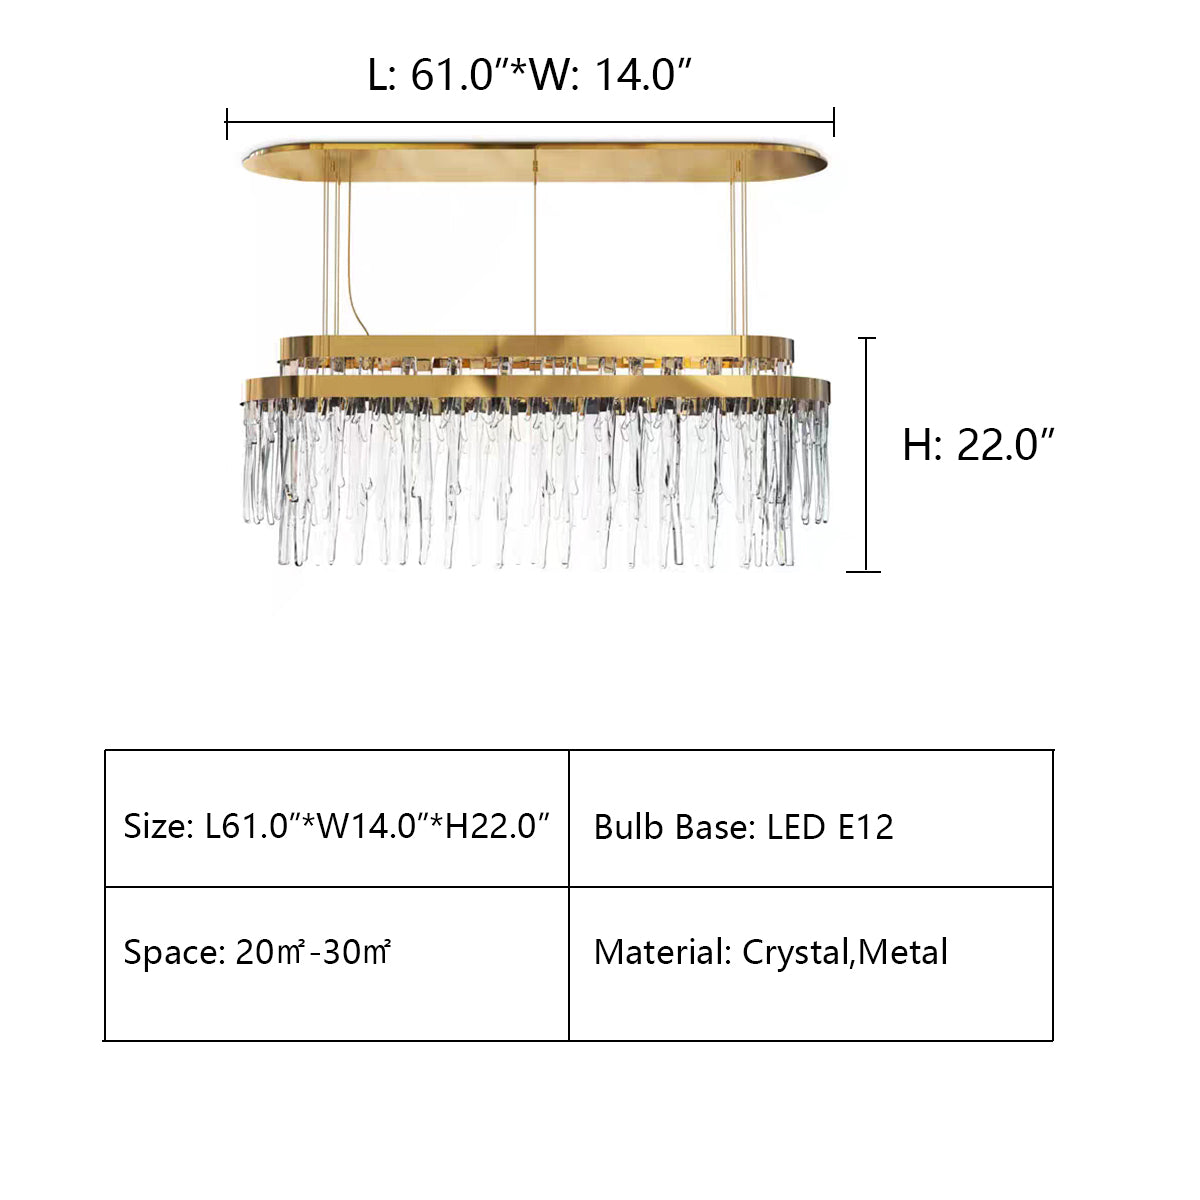 L61.0"*W14.0"*H22.0" LAVAL WATERFALL TUBULAR LINEAR CHANDELIER,chandelier,chandelirs,crystal,metal,gold,clear,transparent,tiers,layers,flush mount,ceiling,dining table,long table,big tabloe,kitchen island,kitchen bar,dining bar